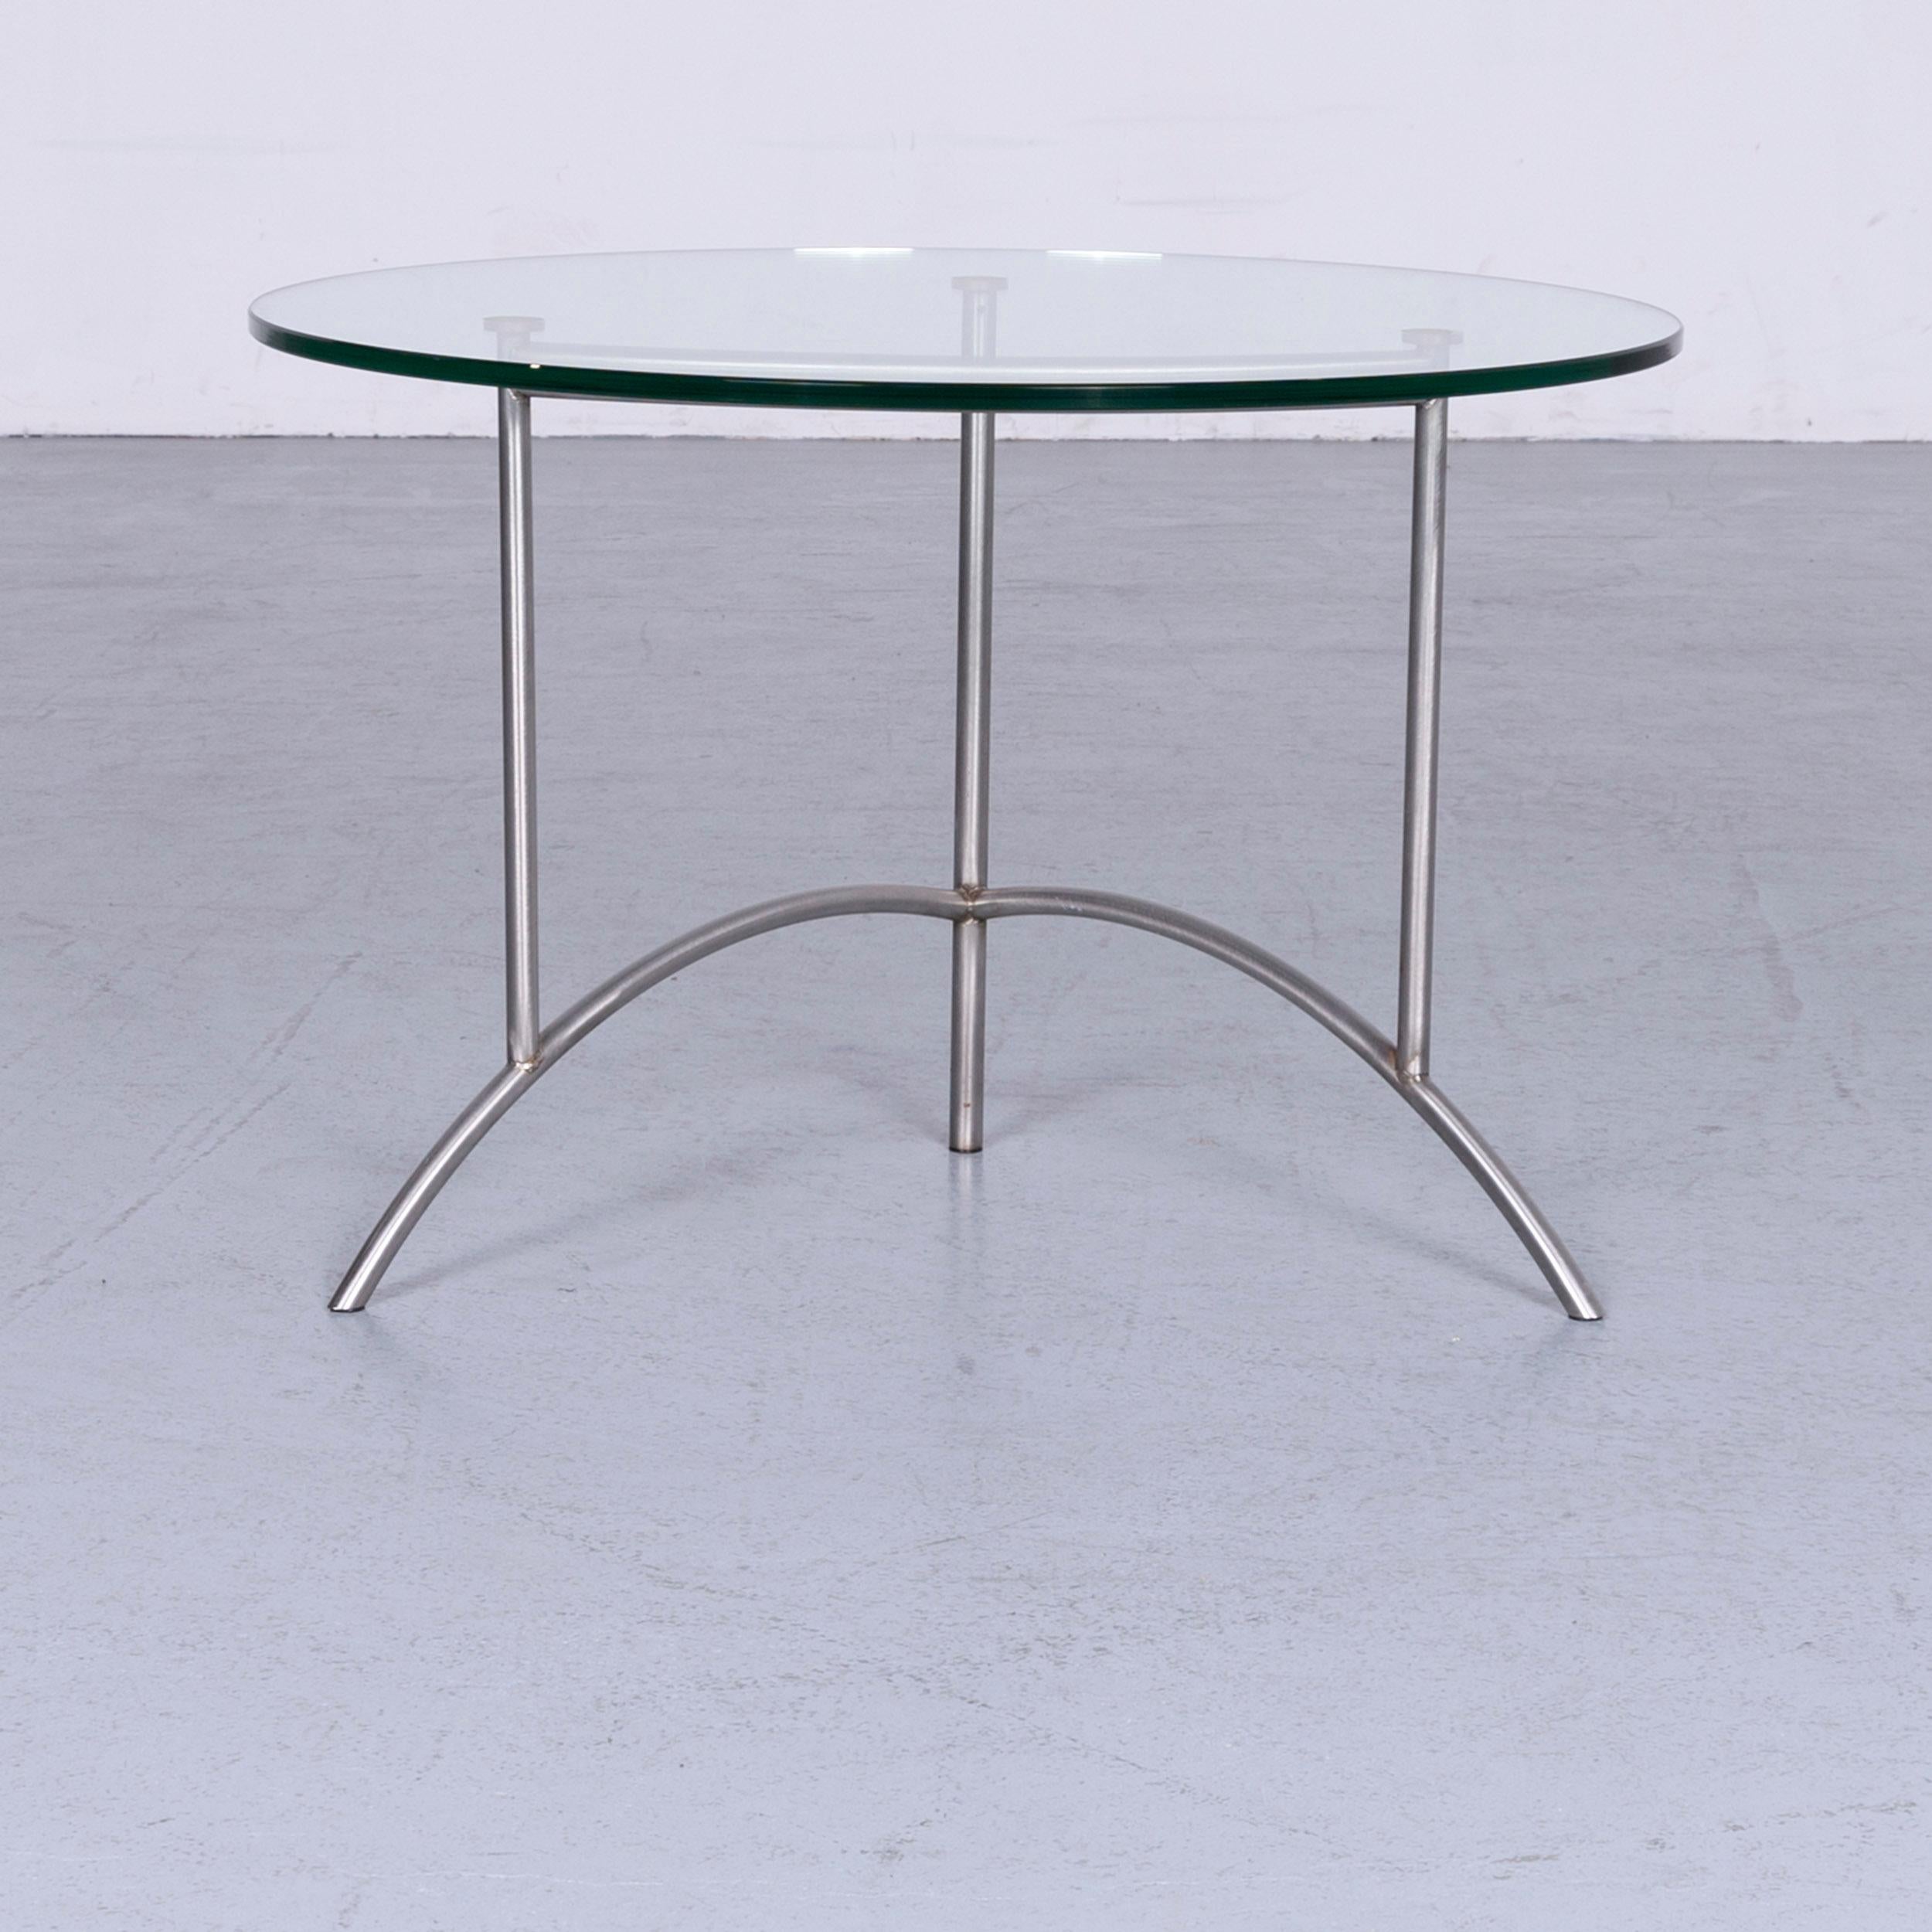 We bring to you an Ronald Schmitt designer glass coffee table set silver round.










